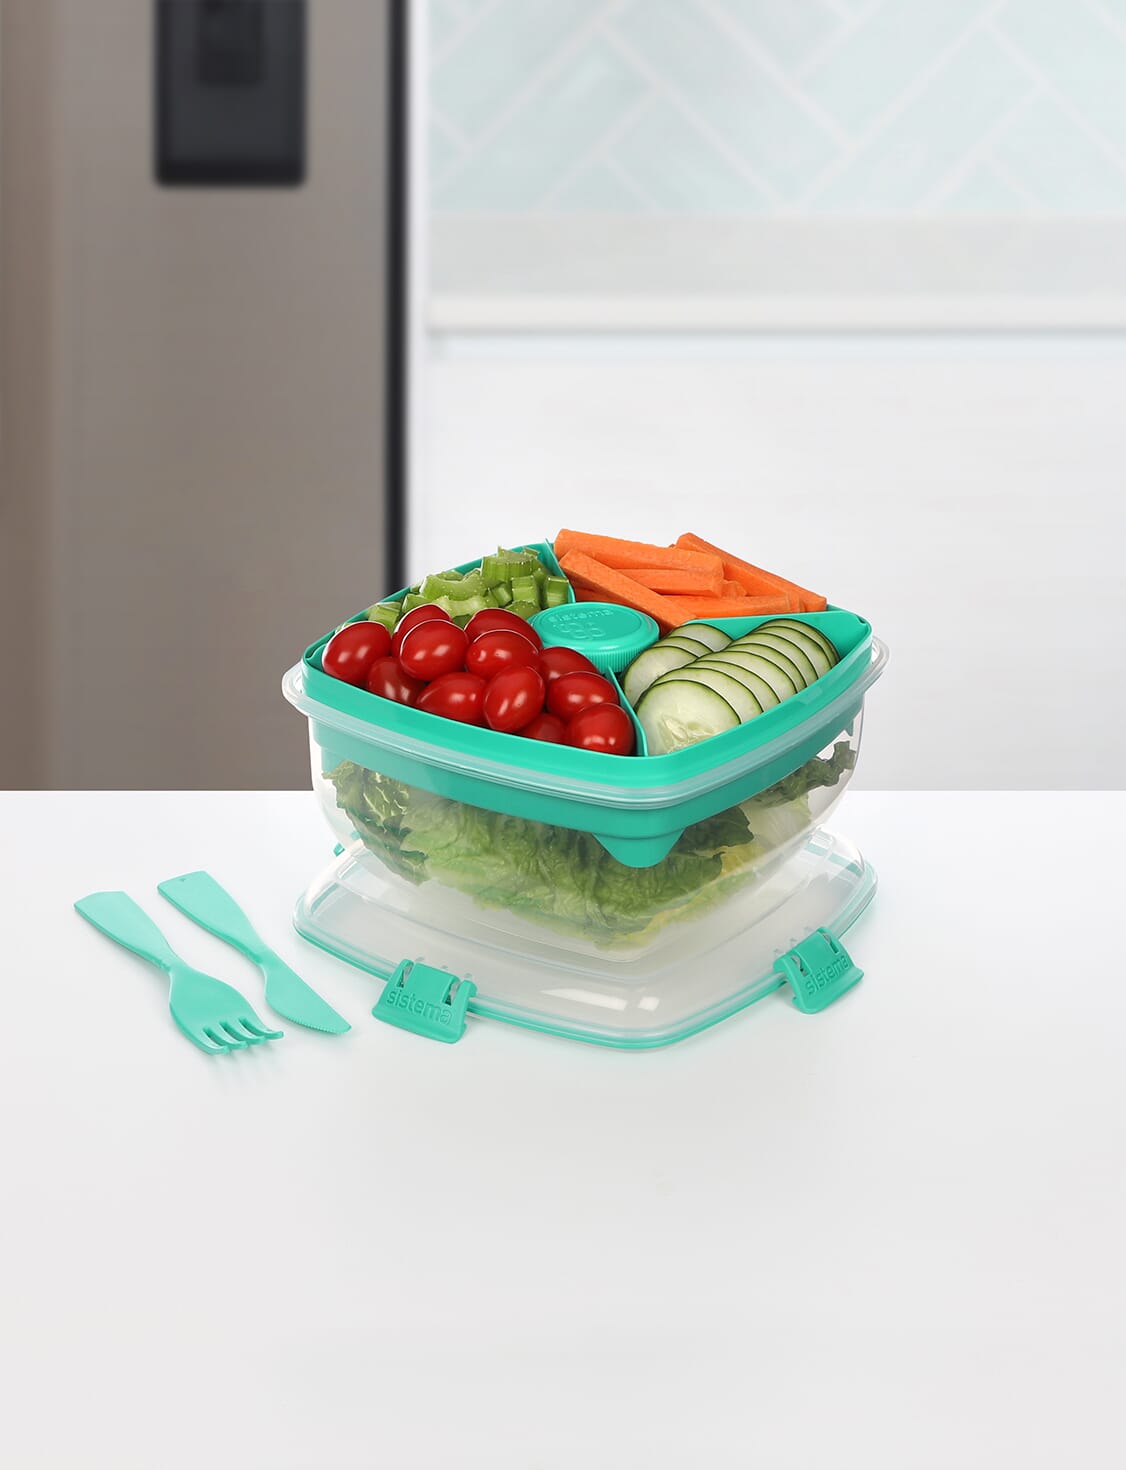 https://stergita.sirv.com/sistema/catalog/product/2/1/21357_saladmaxtogo_lifestyle_bench_teal.png?canvas.color=fcfbf8